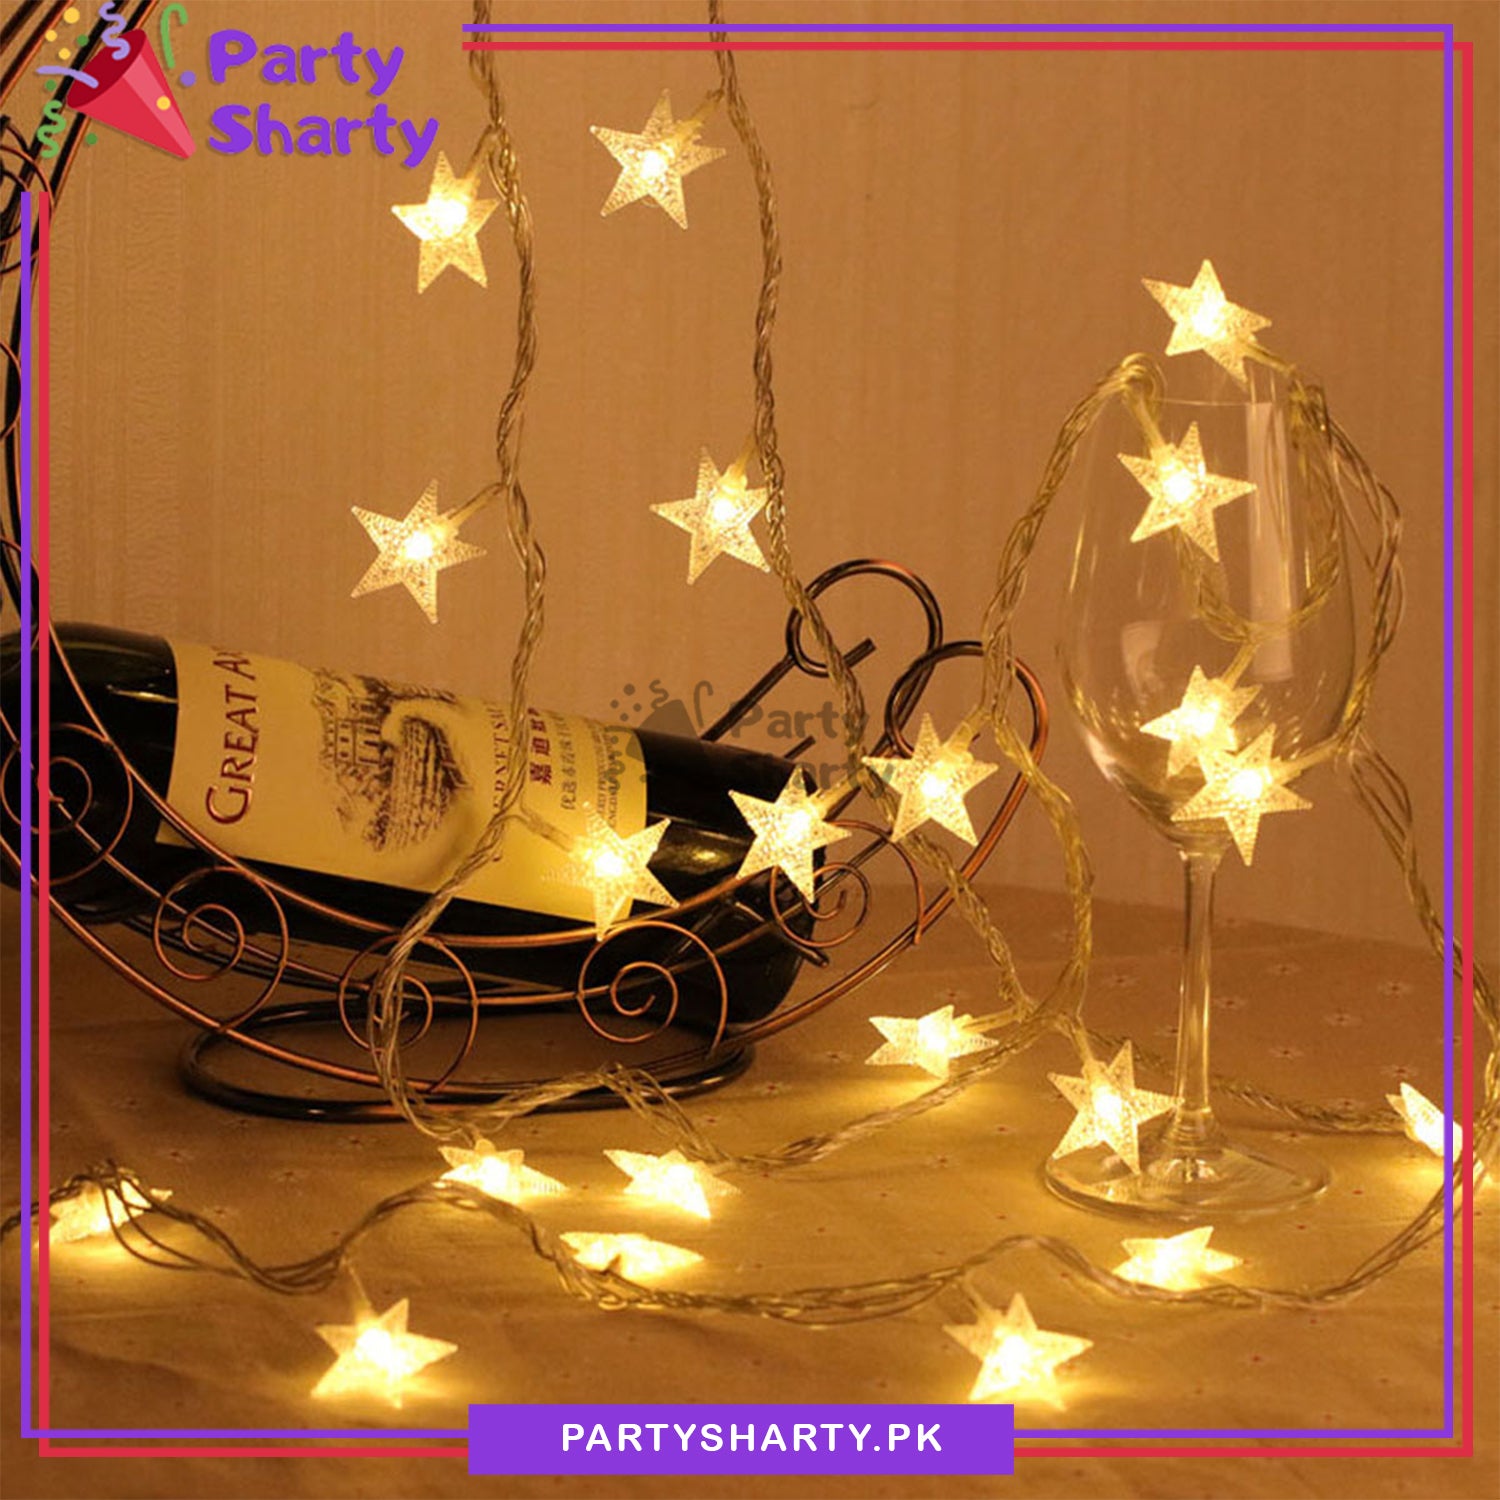 LED Star Fairy Light Battery Operated 20 Stars String Light For Room and Party Decoration